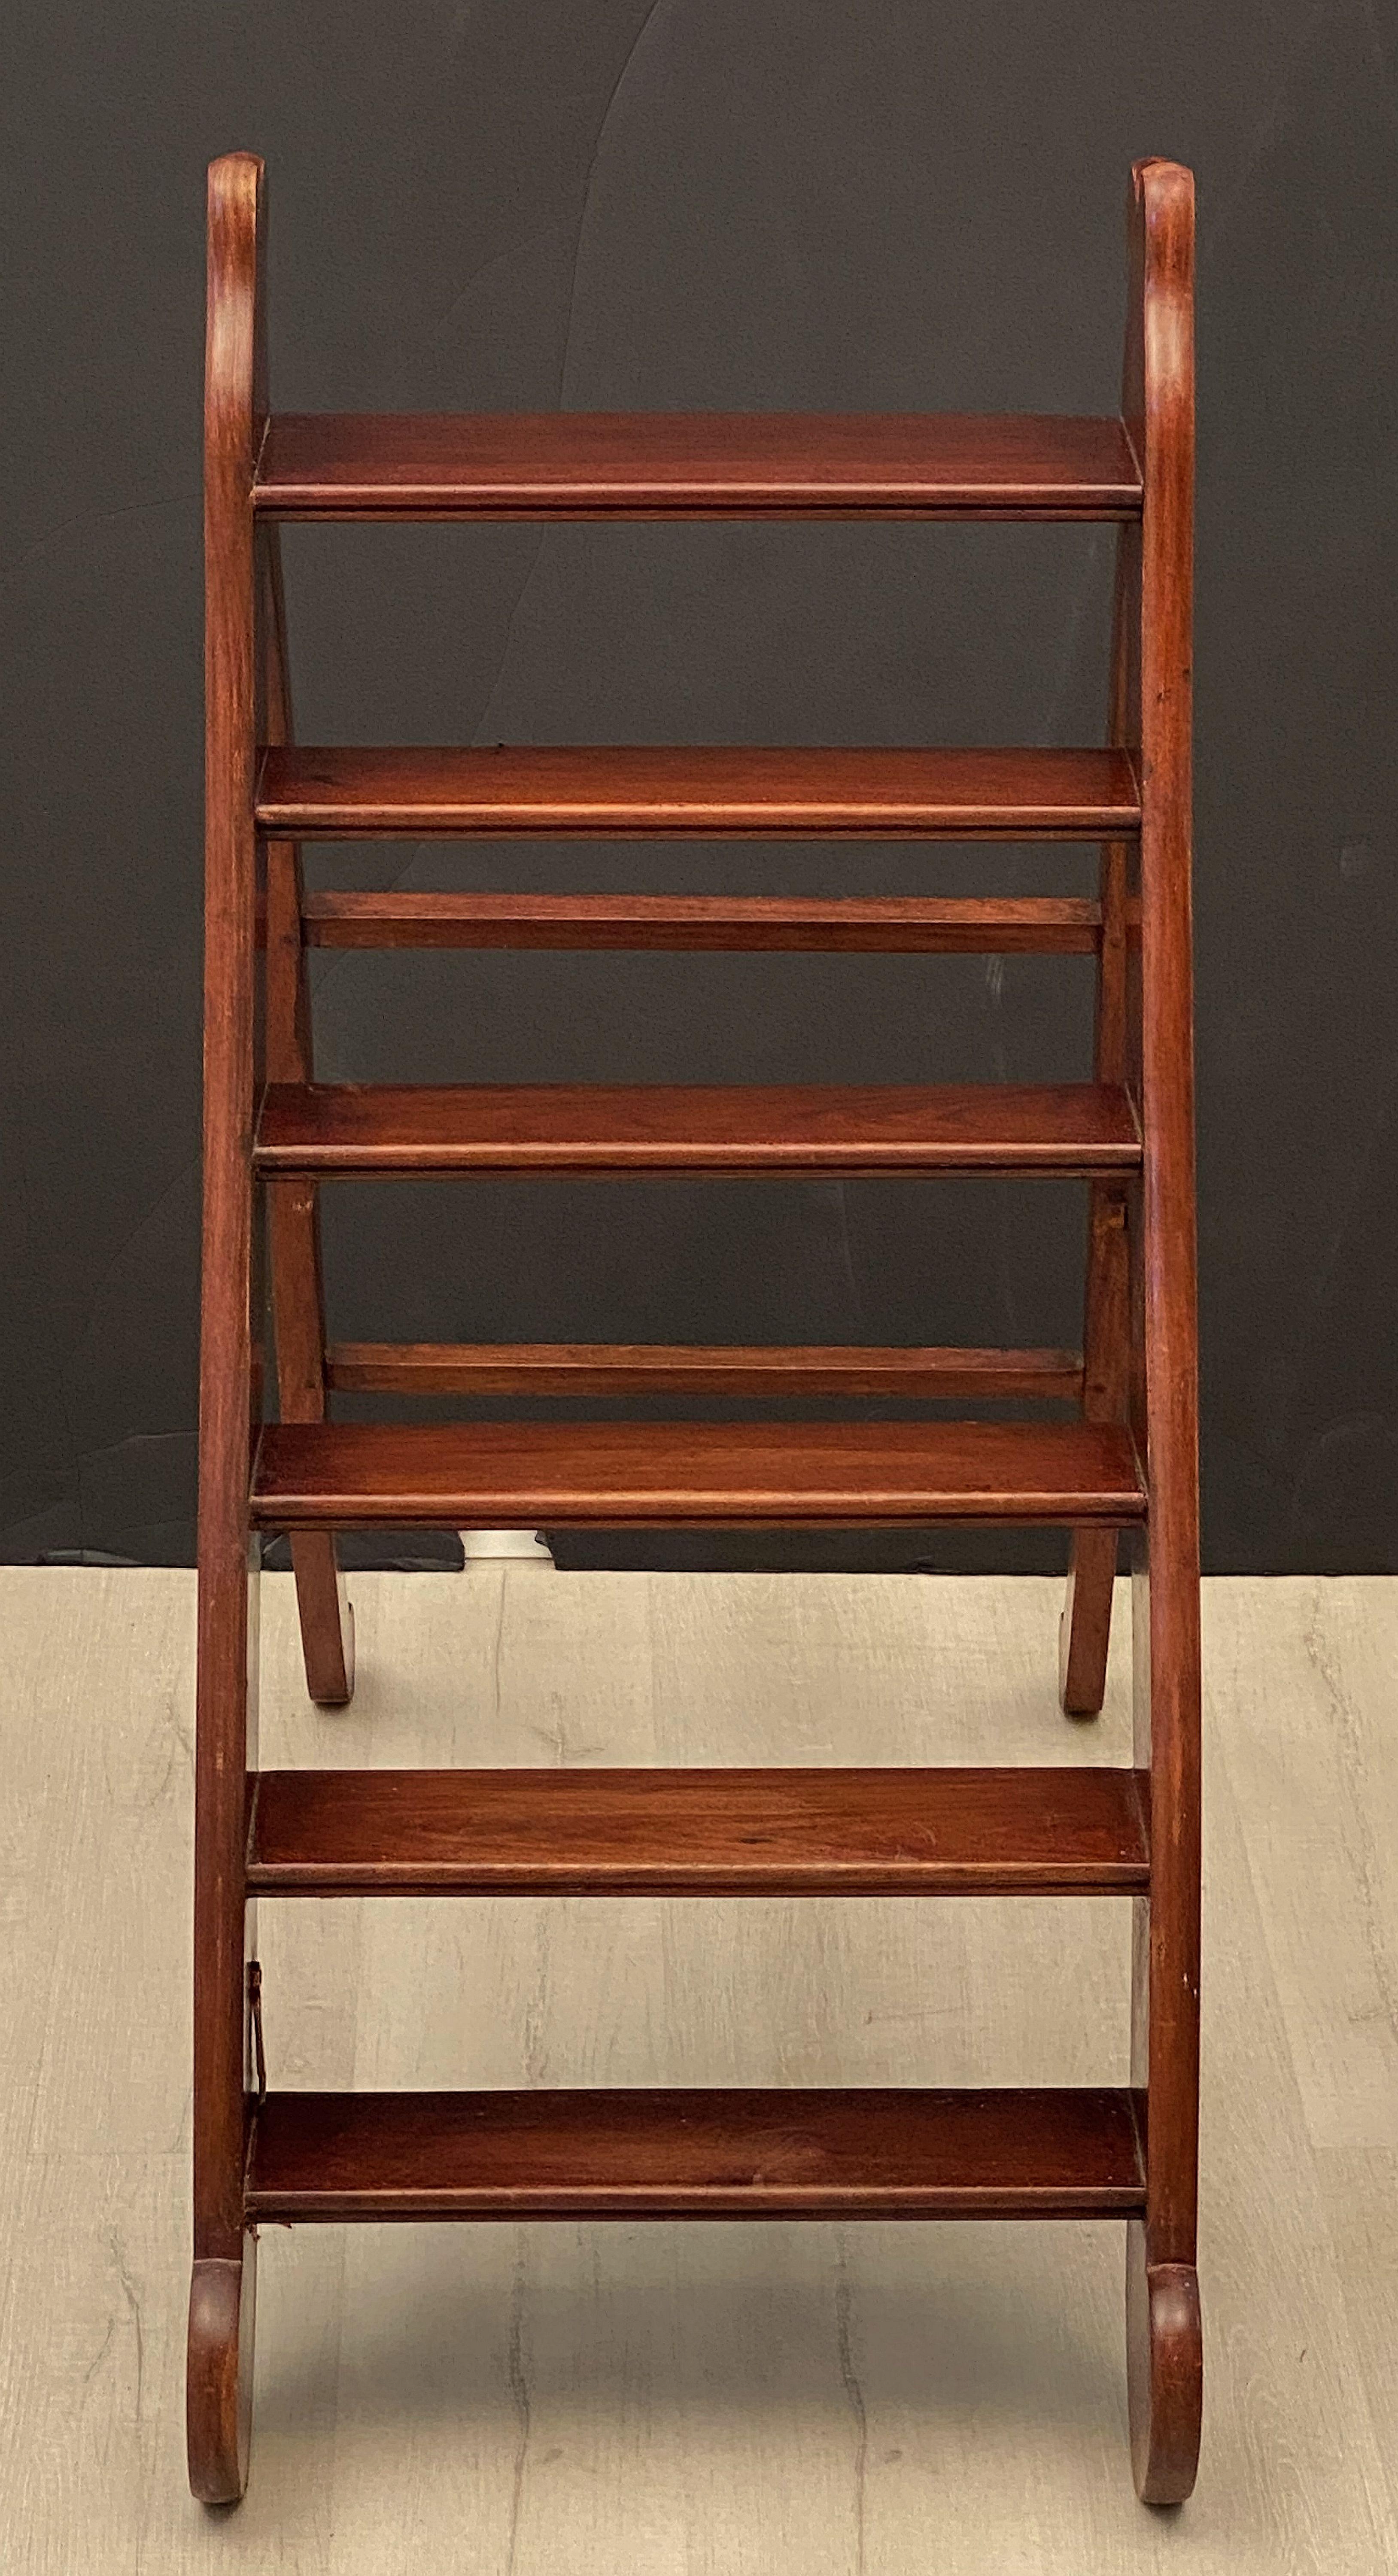 A fine period English folding library step ladder (or library steps) of mahogany with brass hardware and hook (for closed or stowaway position) from the Edwardian Era.

Dimensions when opened:

H 43 inches
W 19 3/4 inches
D 39